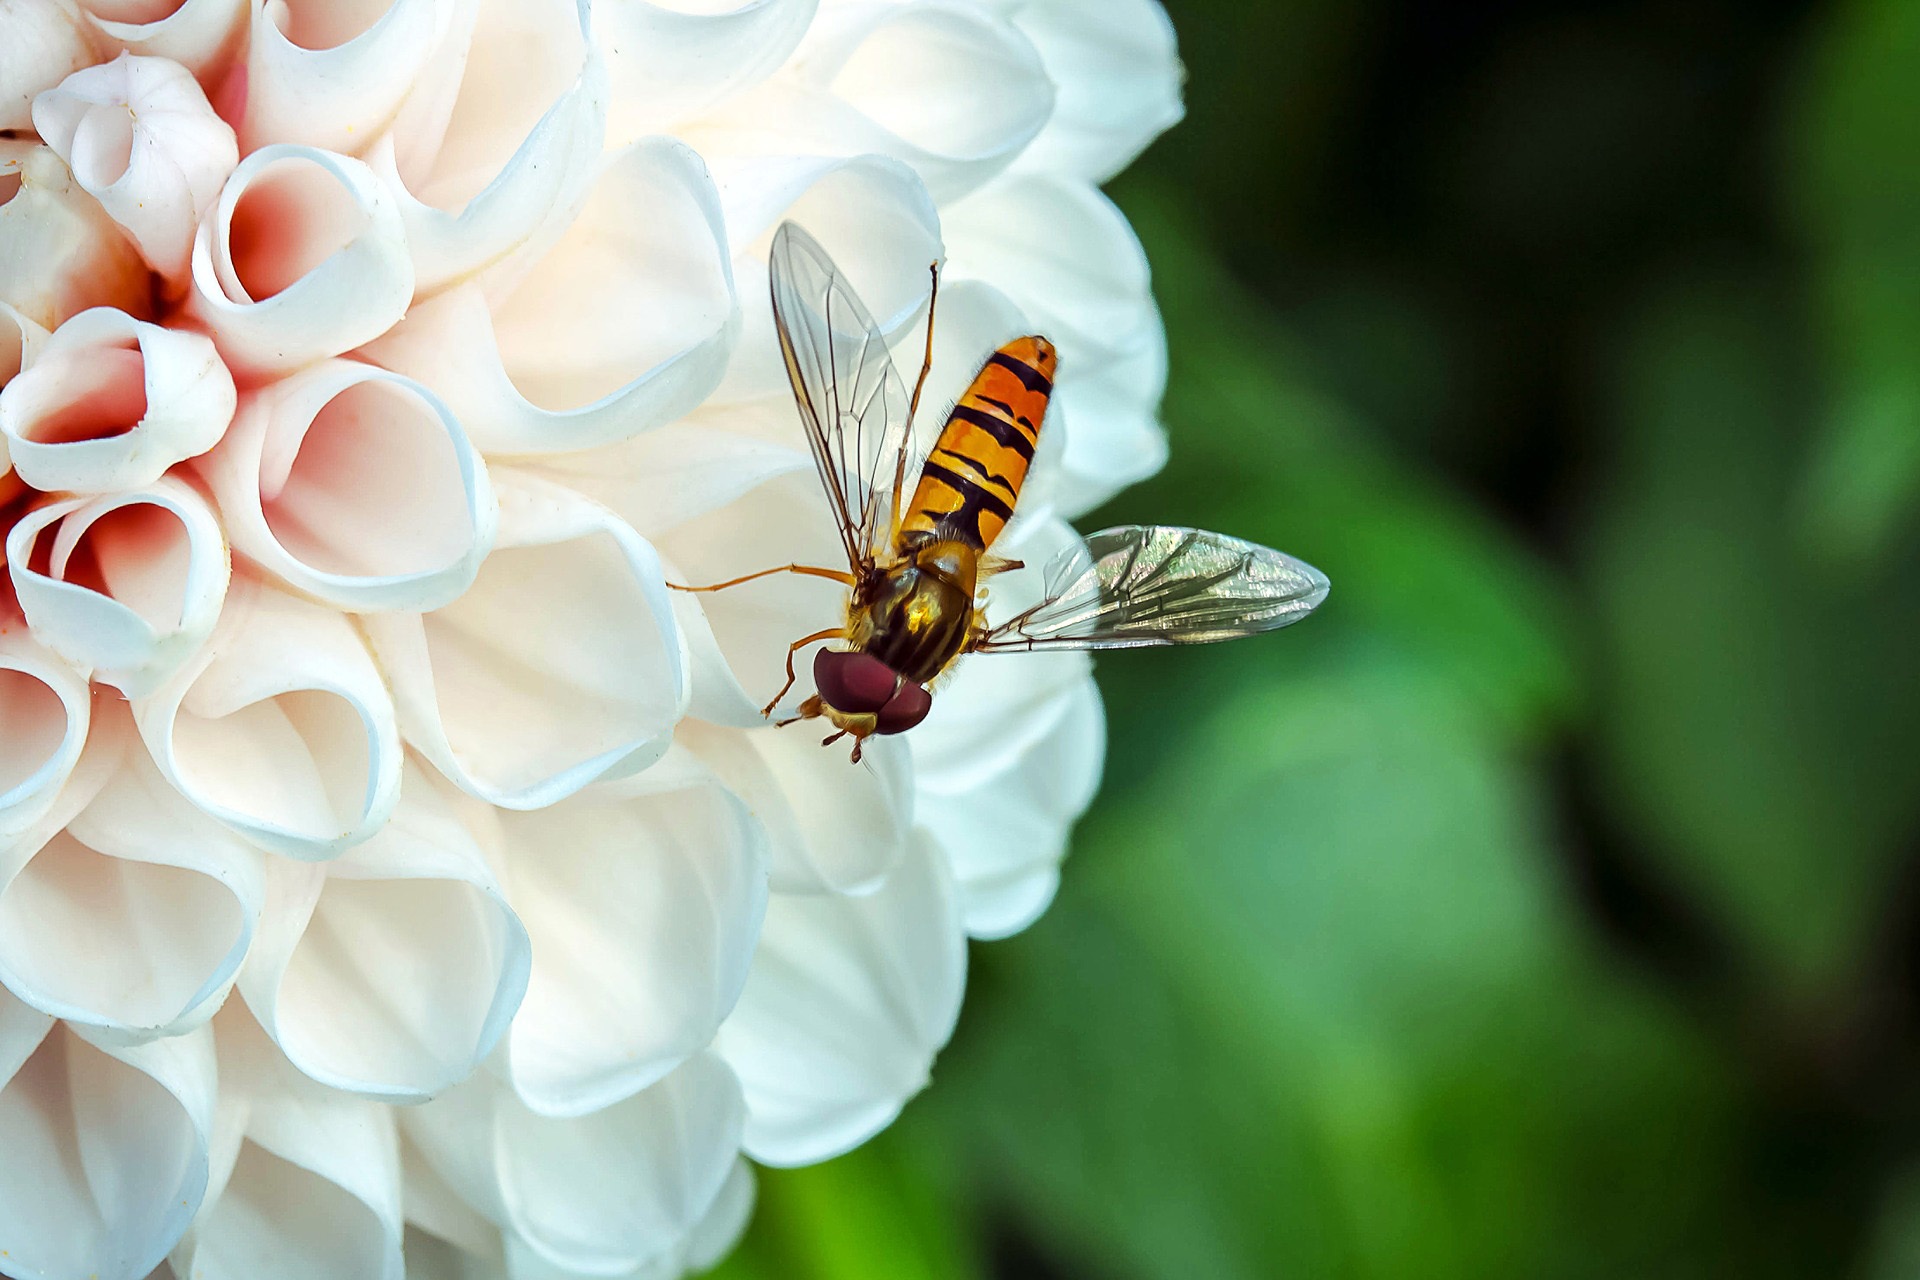 Fly in the Garden, Animal, Blooming, Flower, Fly, HQ Photo